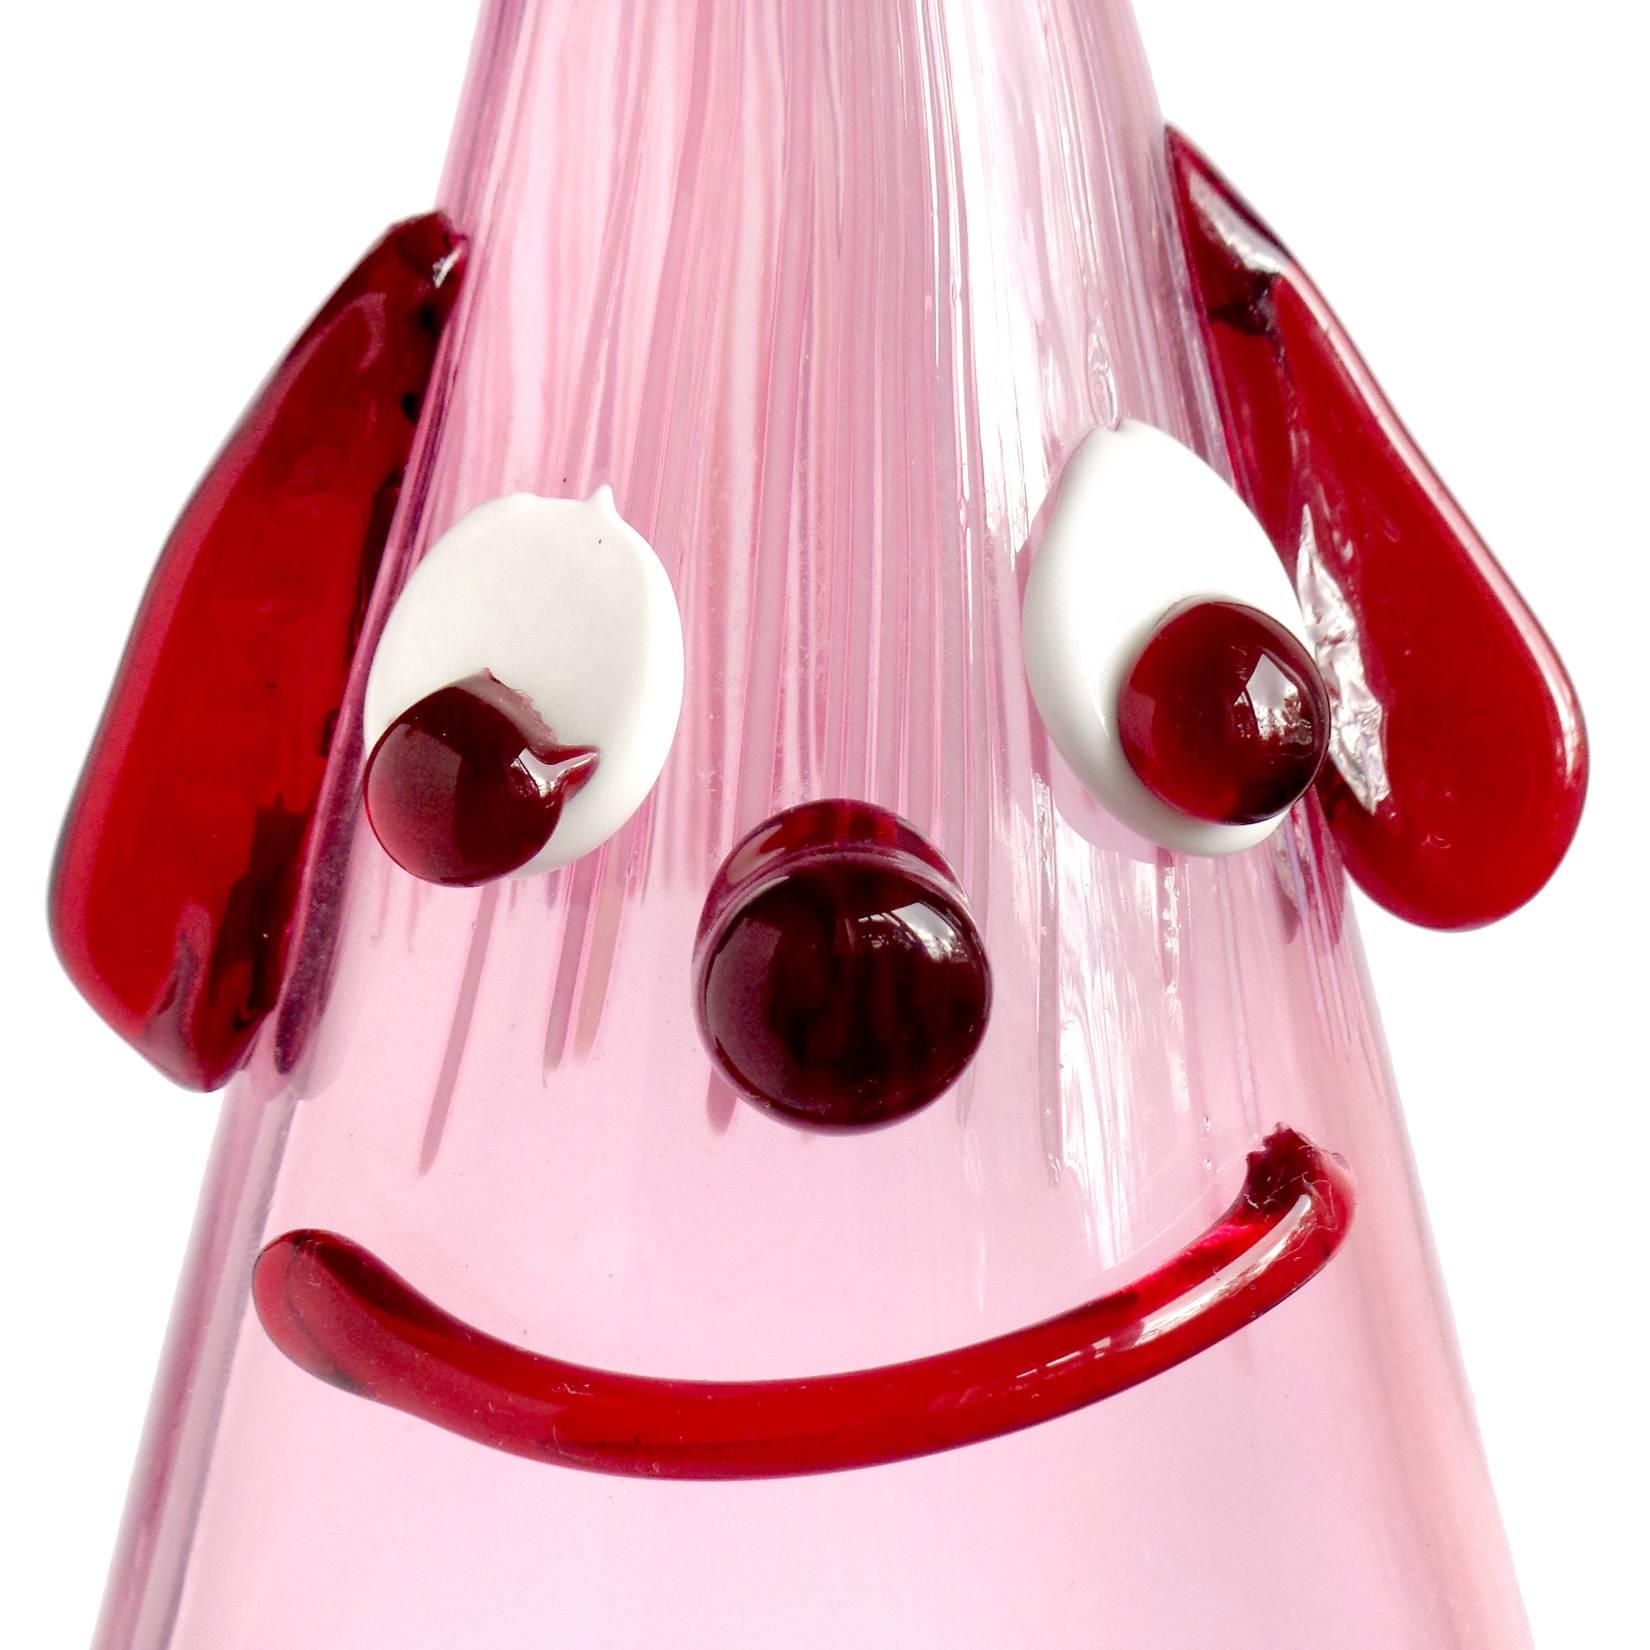 Cute and unusual Murano hand blown Italian art glass cranberry pink decanter, with applied red and white clown face. Documented to the Fratelli Toso Company. The piece has droopy ears, wide eyes, a big smile and threads of pink glass for the hair.